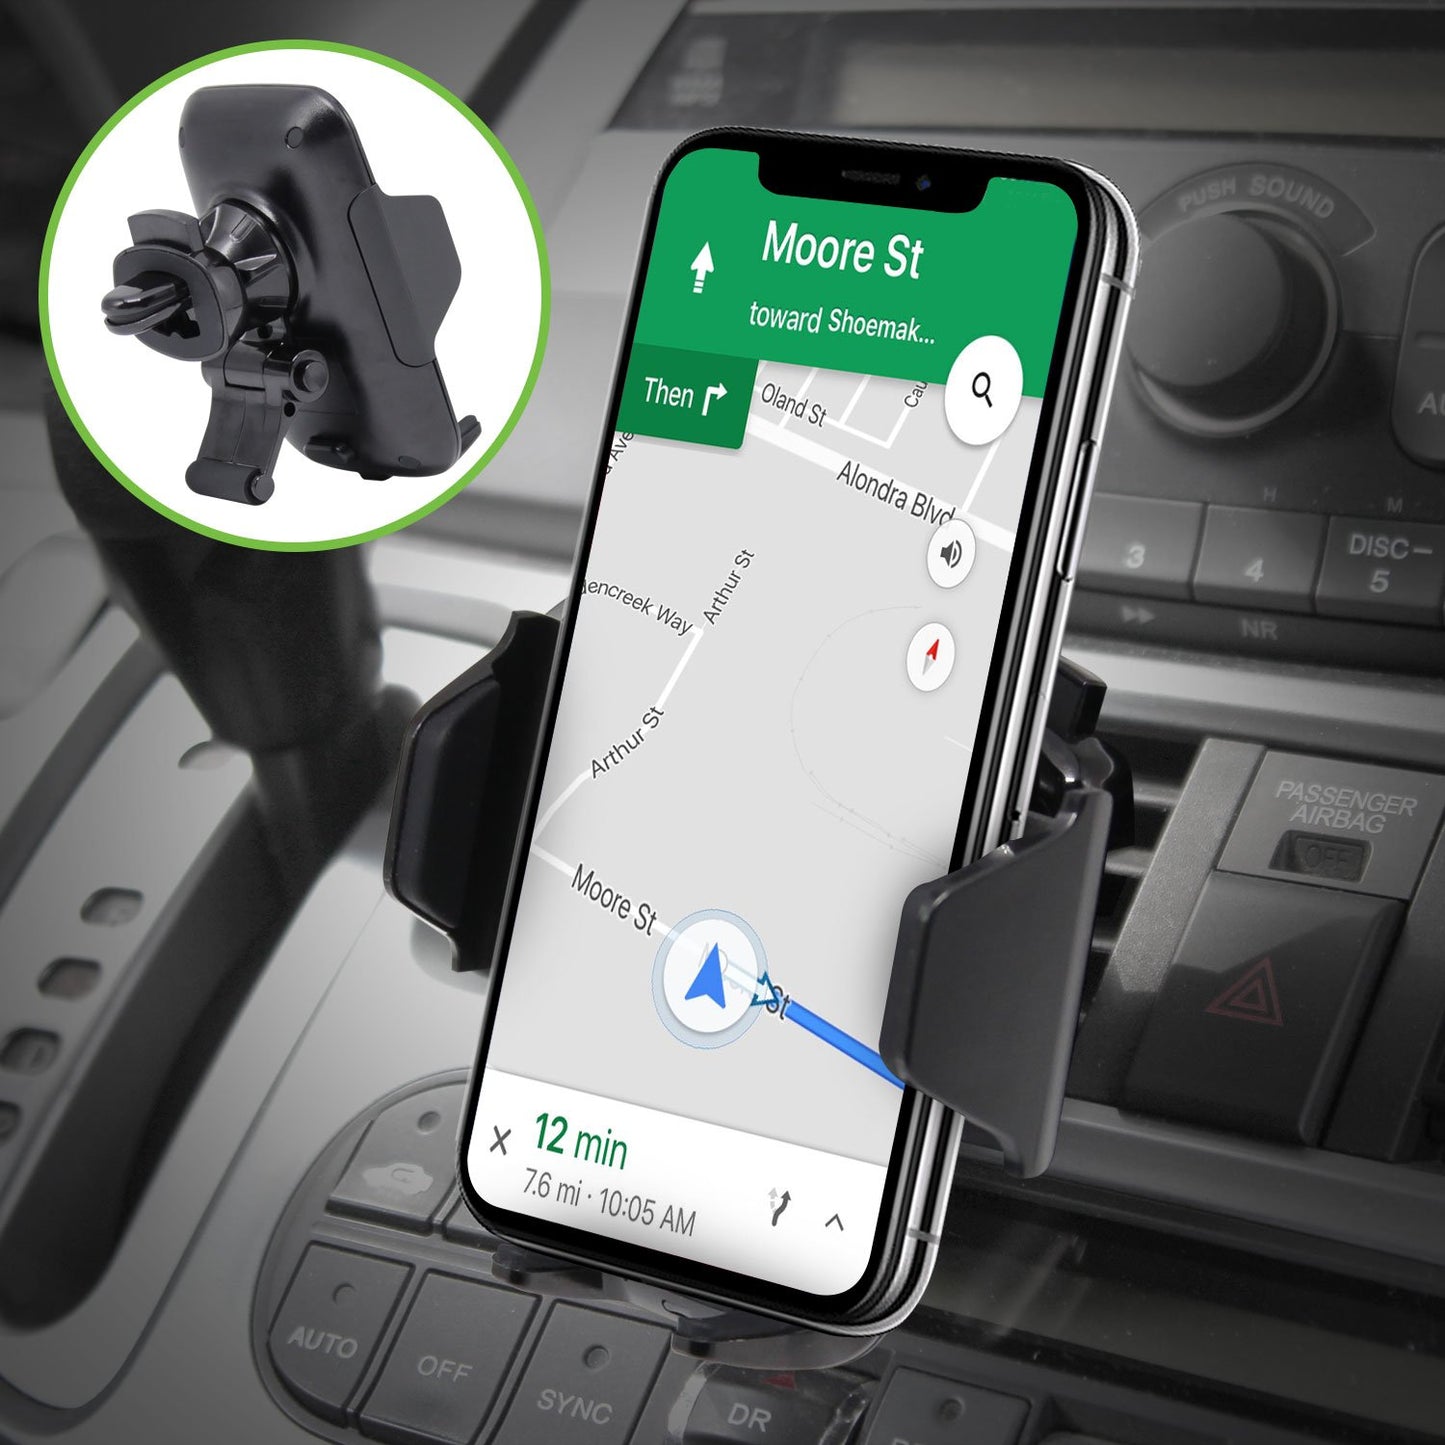 QI600 - 2-in-1 Wireless Charging Phone Mount, (10 Watt/2.1 Amp) Air Vent and Dashboard Phone Mount for Apple iPhone X, 8, 8 Plus, and More